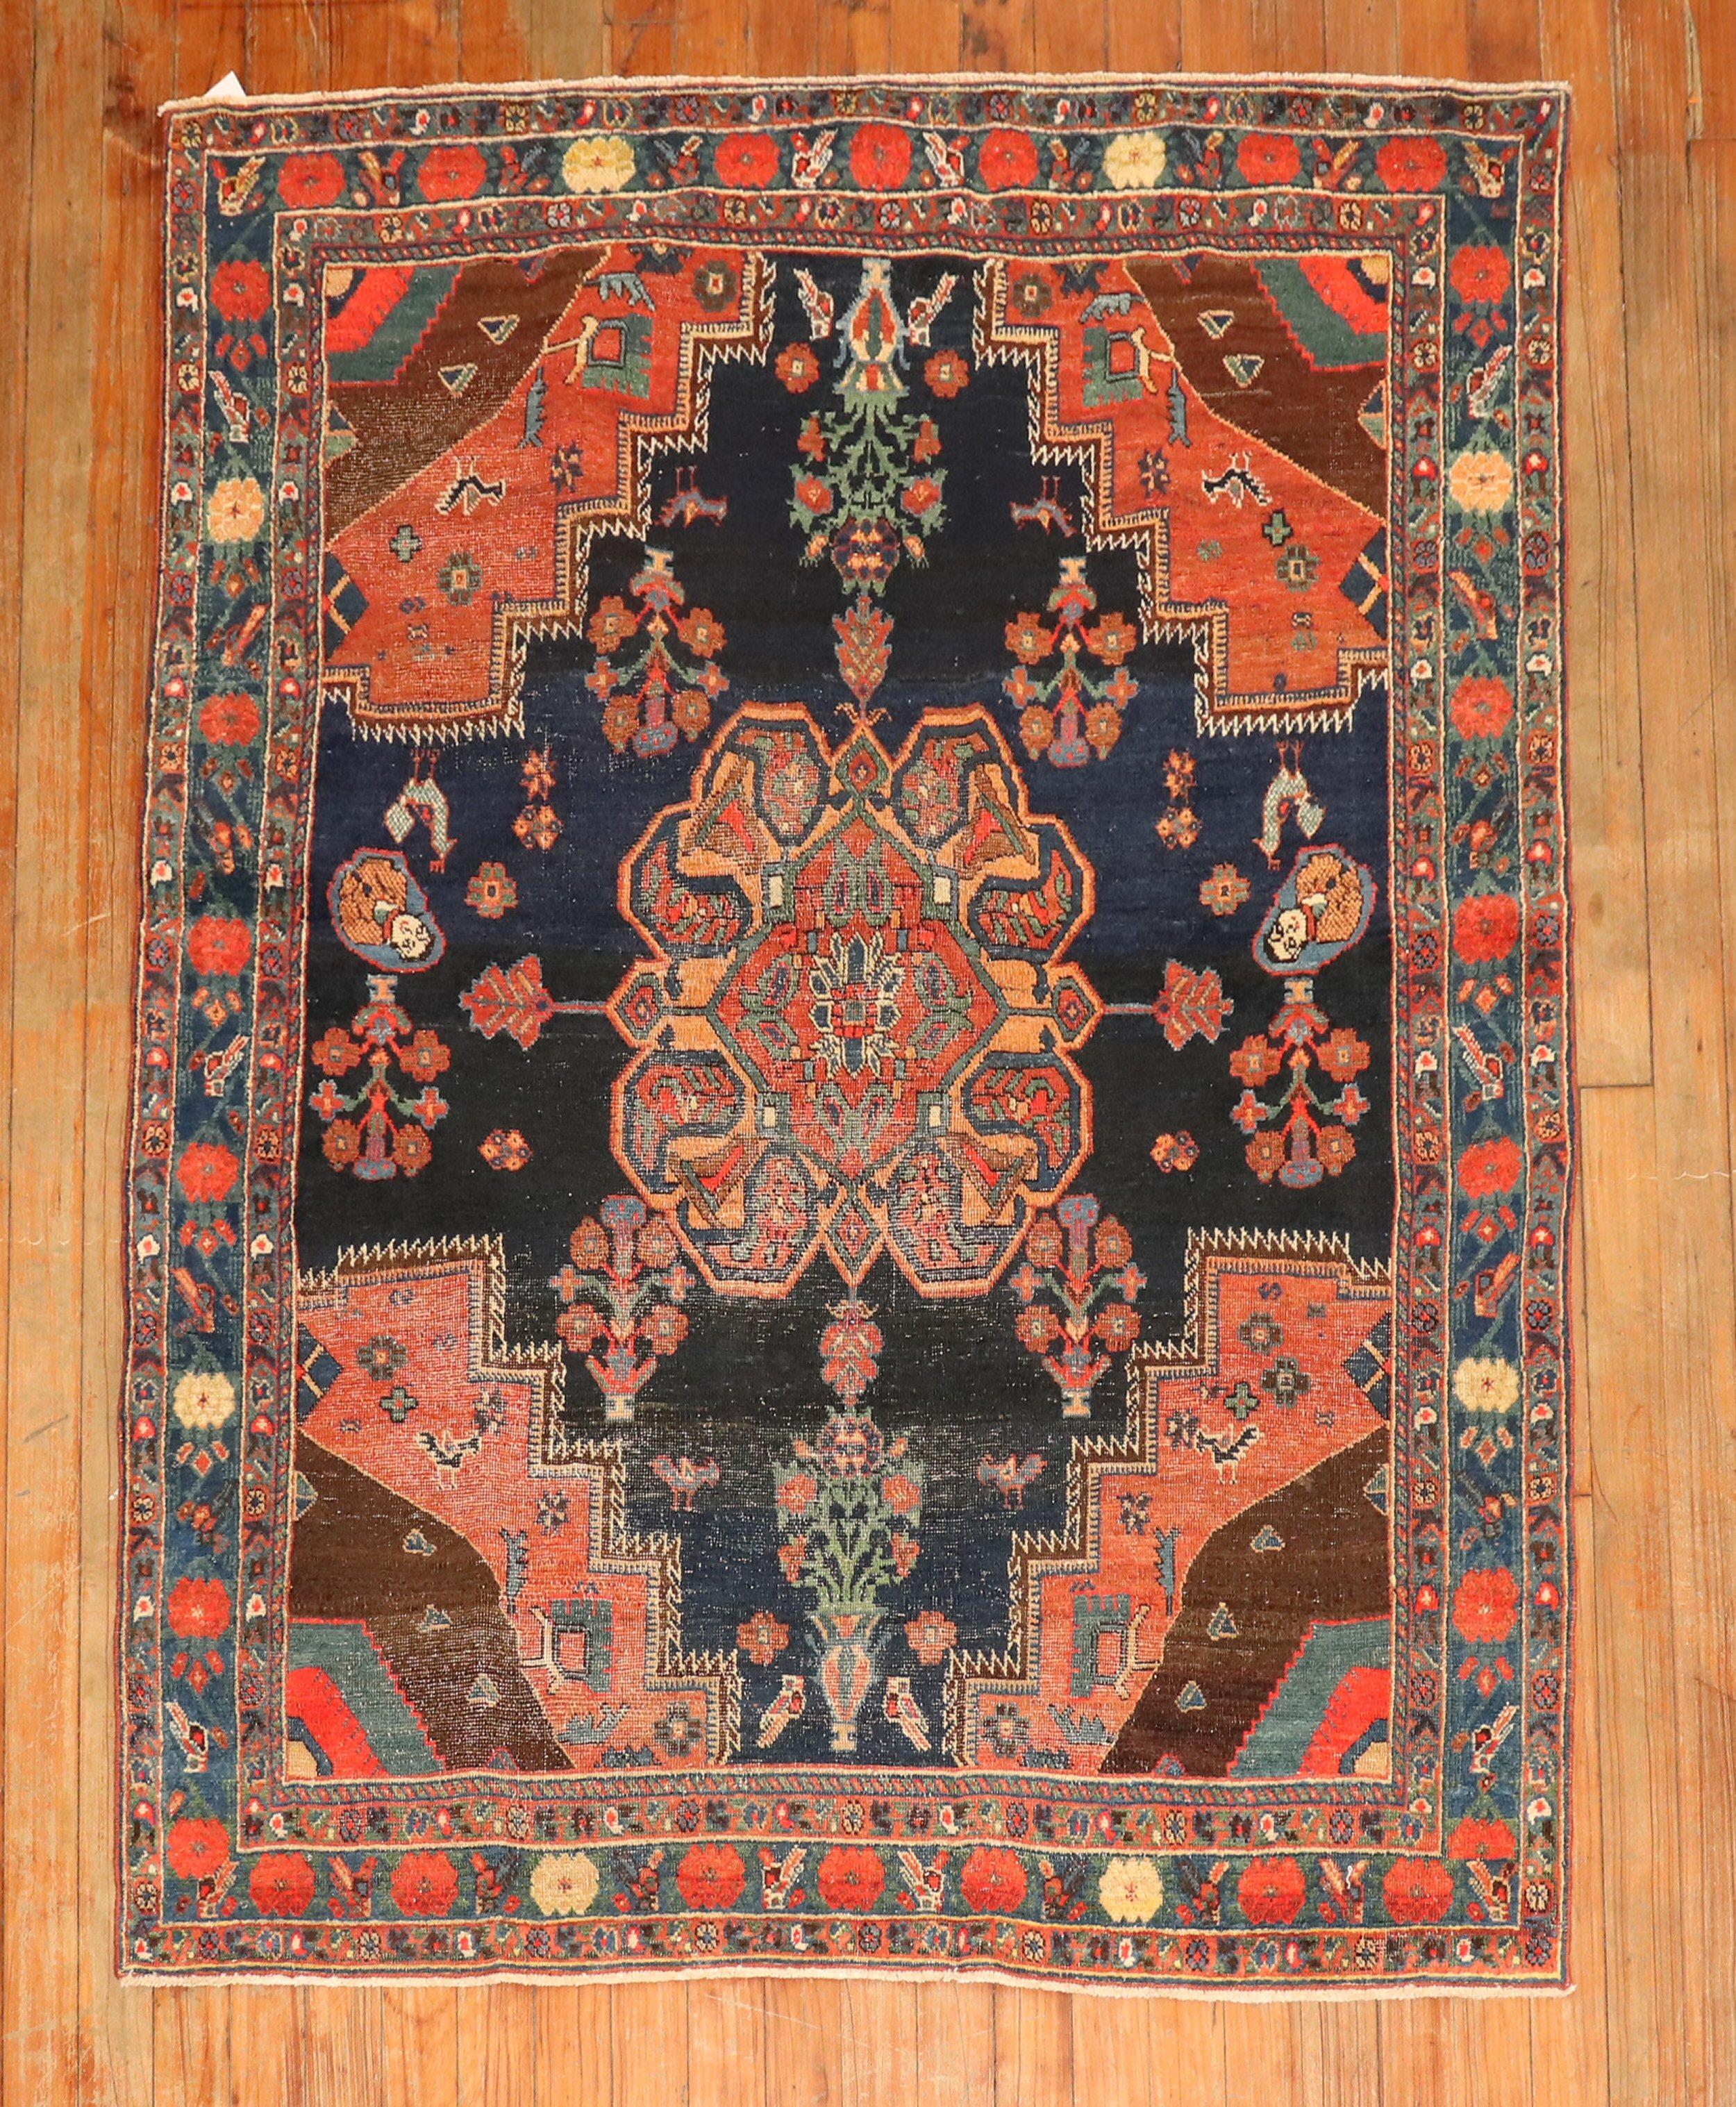  Persian Afshar Rug from the early 20th century

rug no.	j1908

size	3' 8